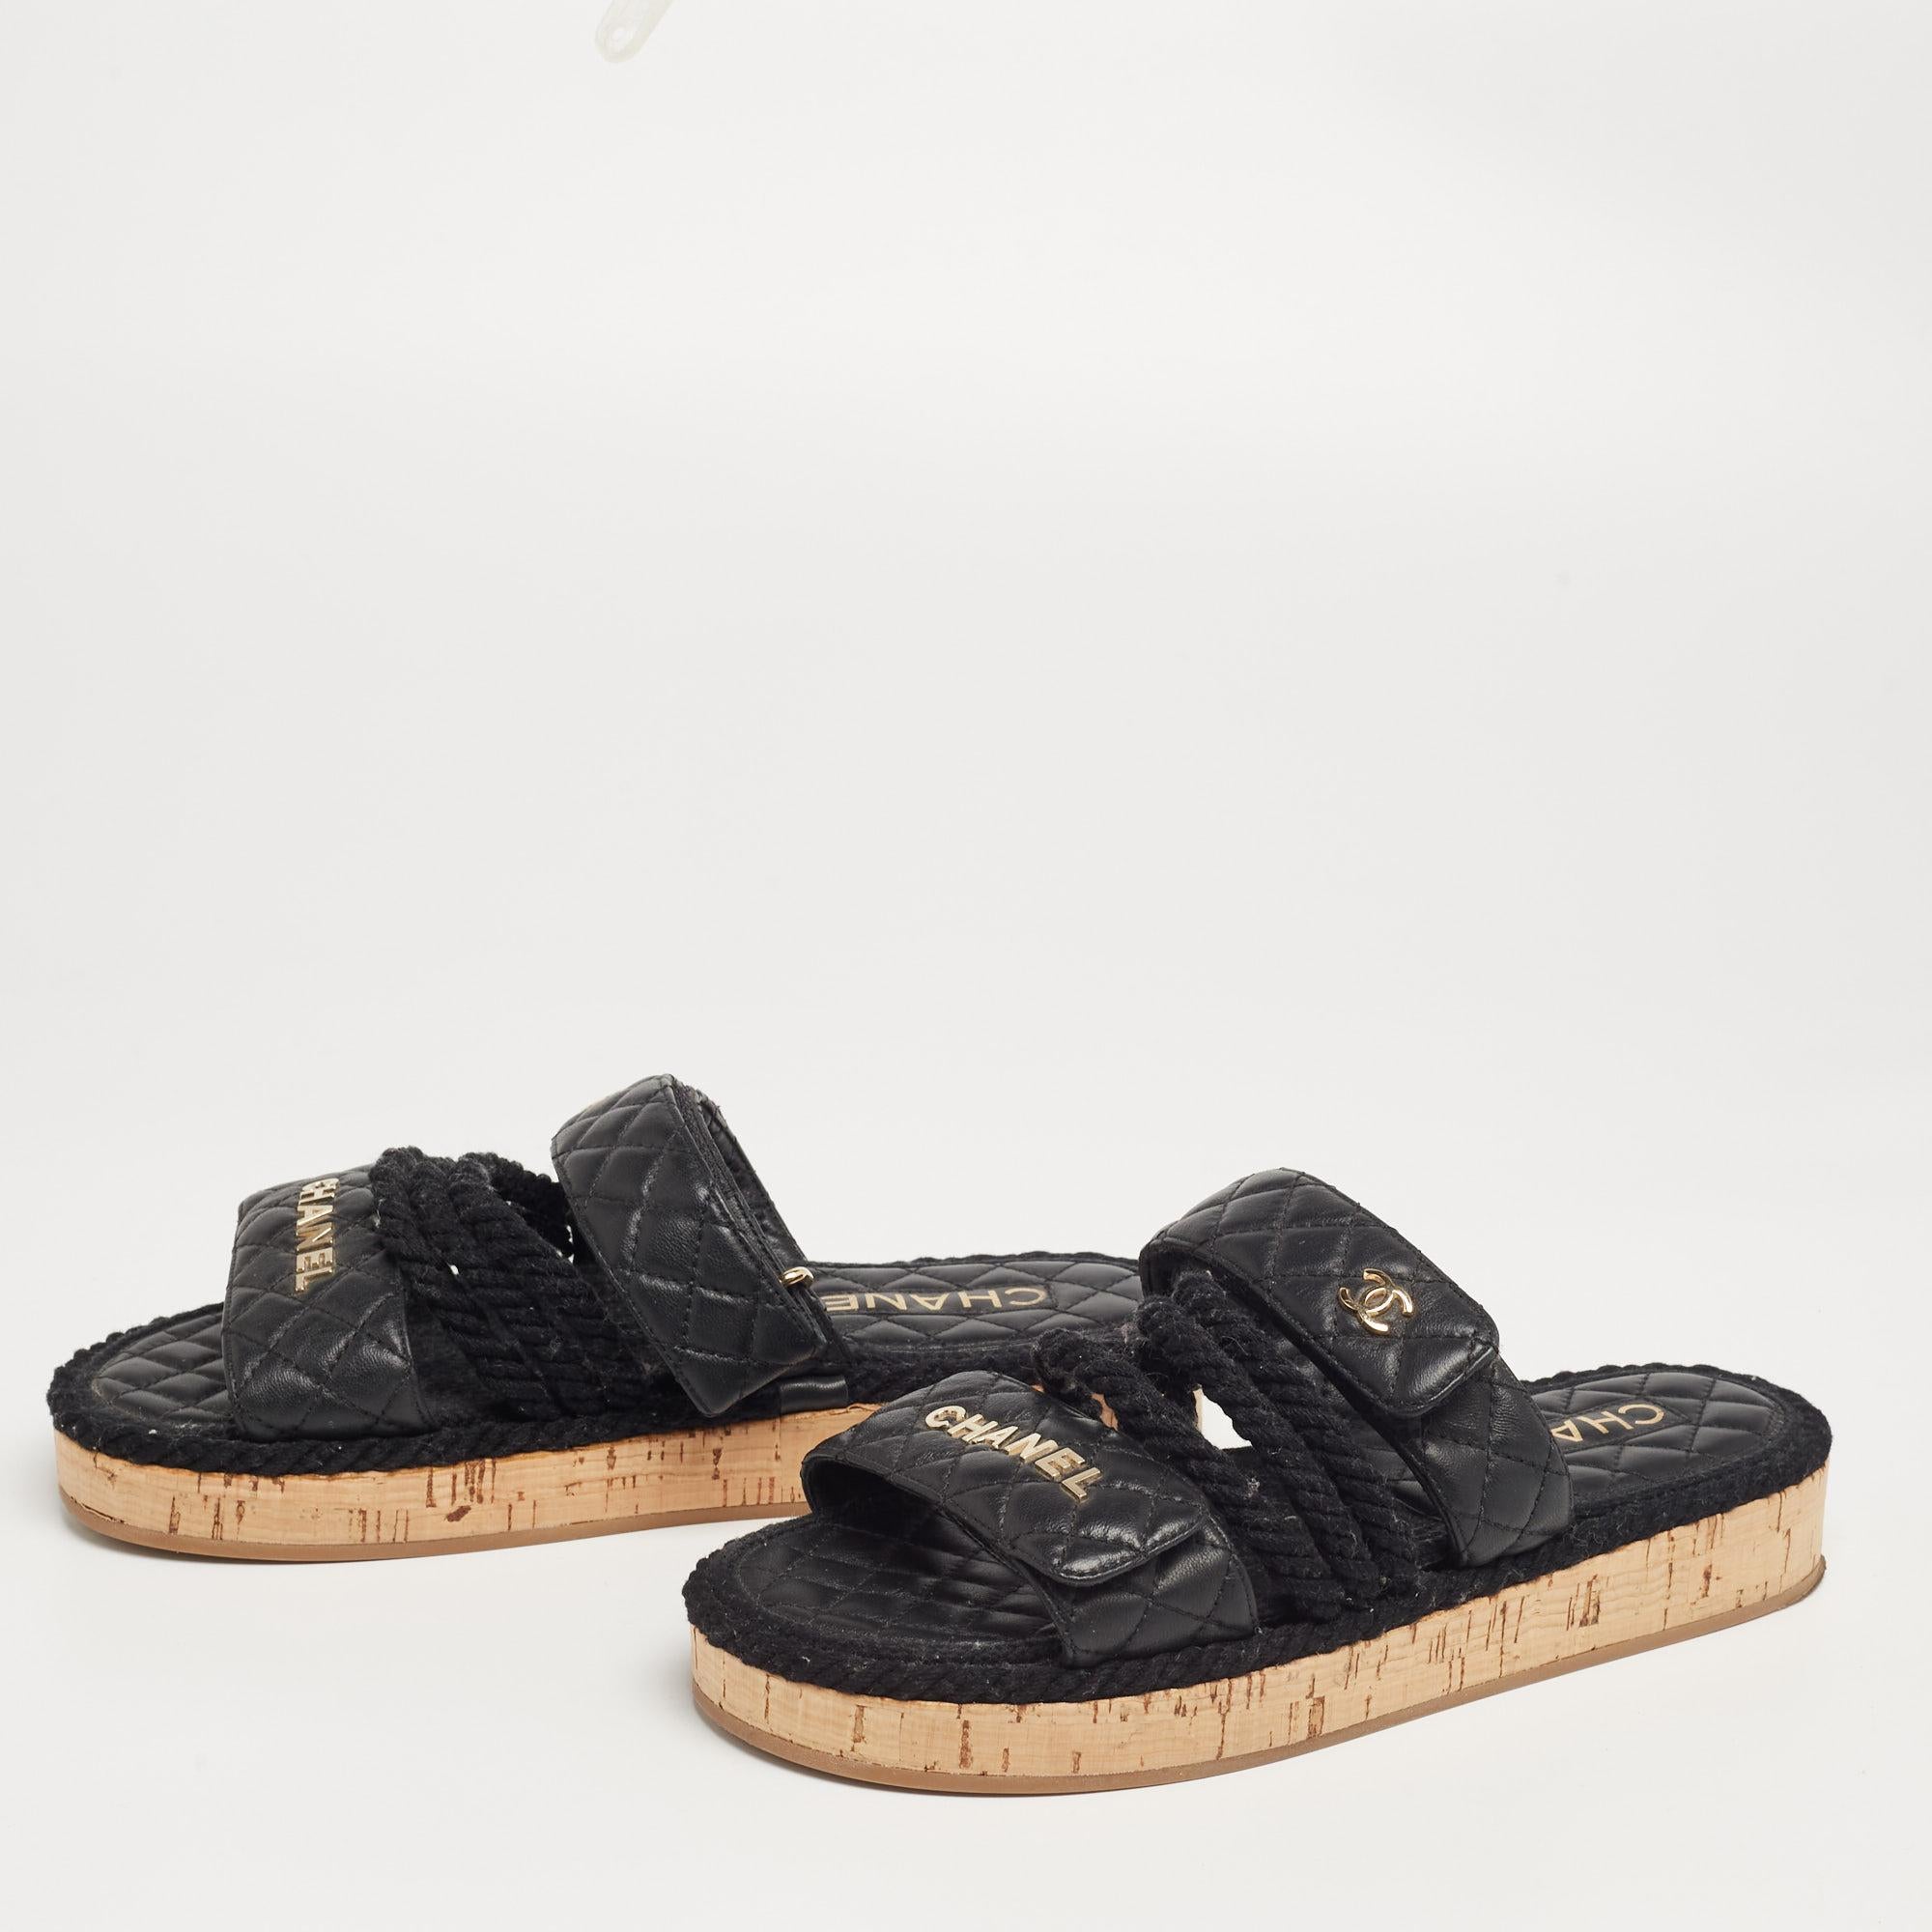 These sandals by Chanel showcase a lovely design. Crafted from leather, the black flats feature open toes and velcro straps. They come with comfortable leather-lined insoles and tough rubber soles. Wear them with shorts or jeans for an edgy appeal.